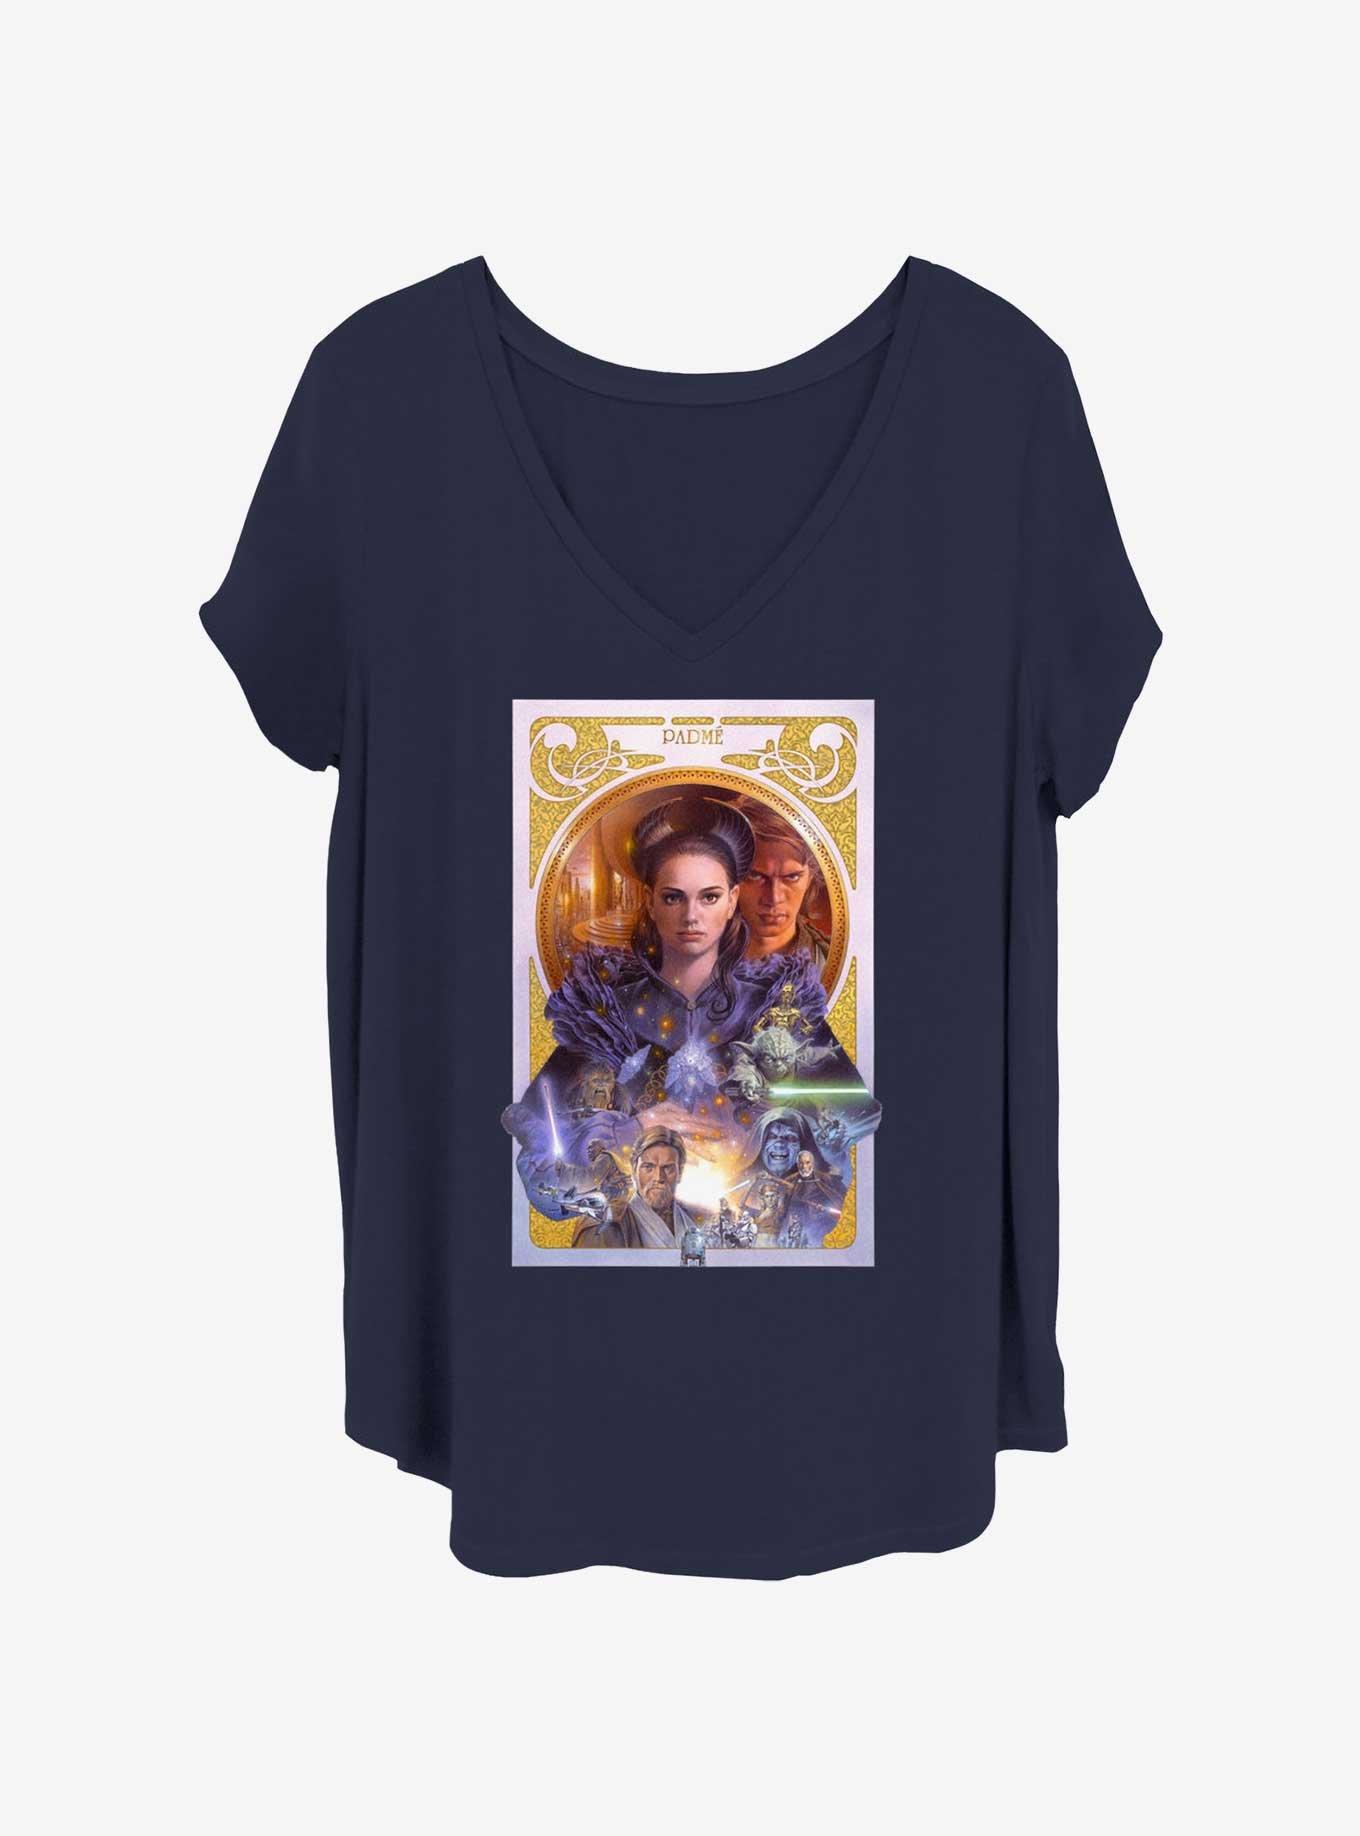 Star Wars Padme Poster Womens T-Shirt Plus Size, NAVY, hi-res